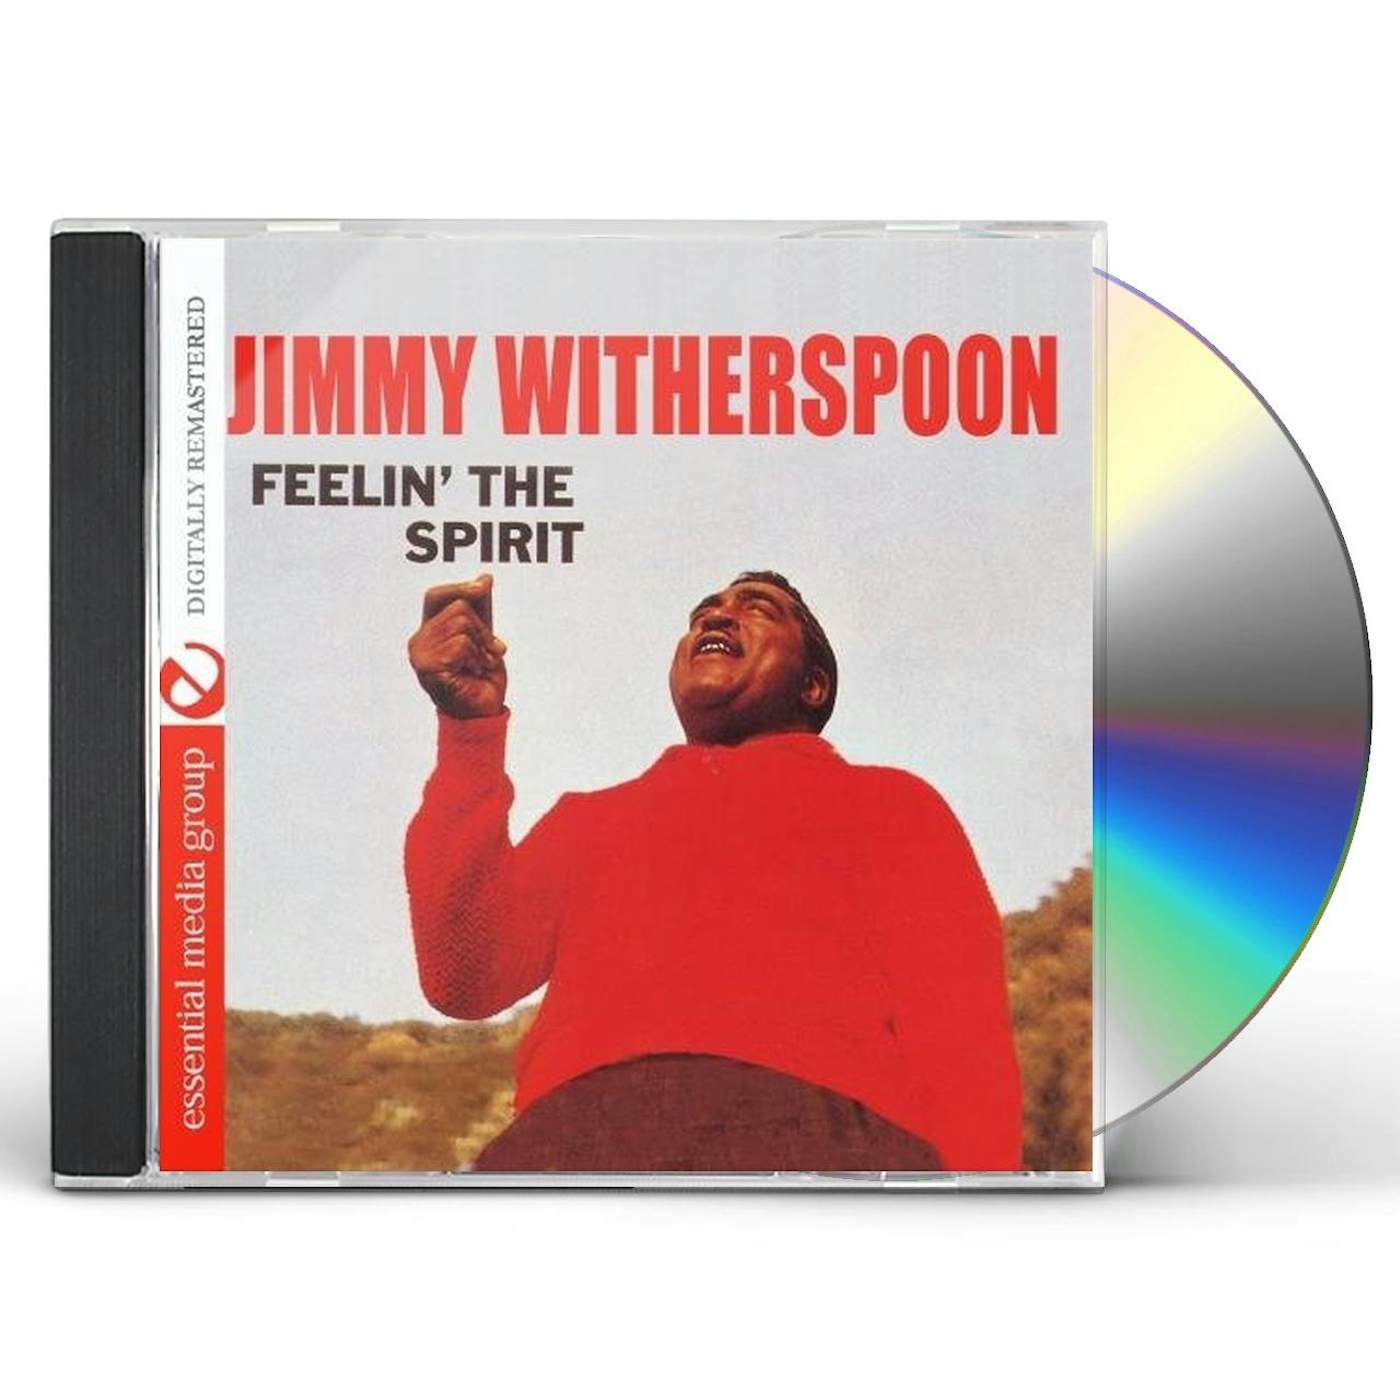 Jimmy Witherspoon FEELIN THE SPIRIT CD